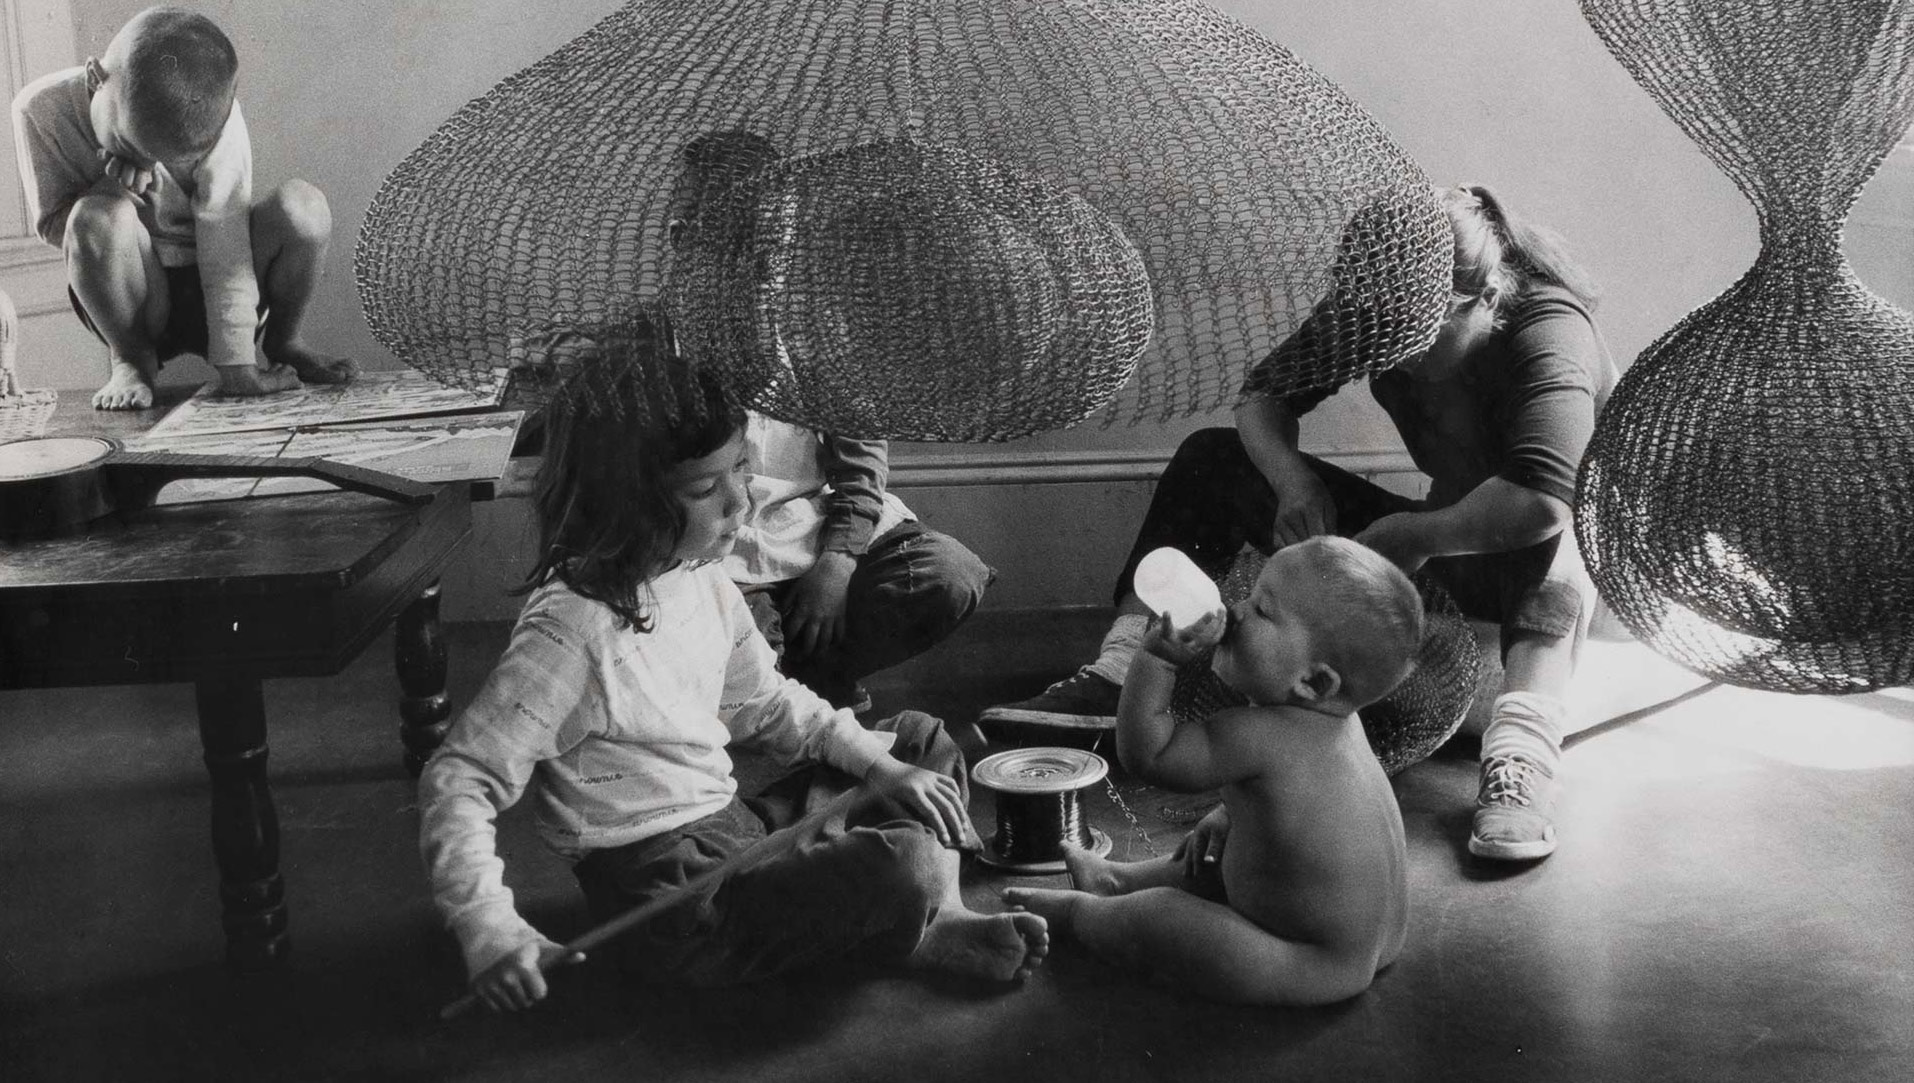 A photo of Ruth Asawa and her children, dated 1957. Photo by Imogen Cunningham.